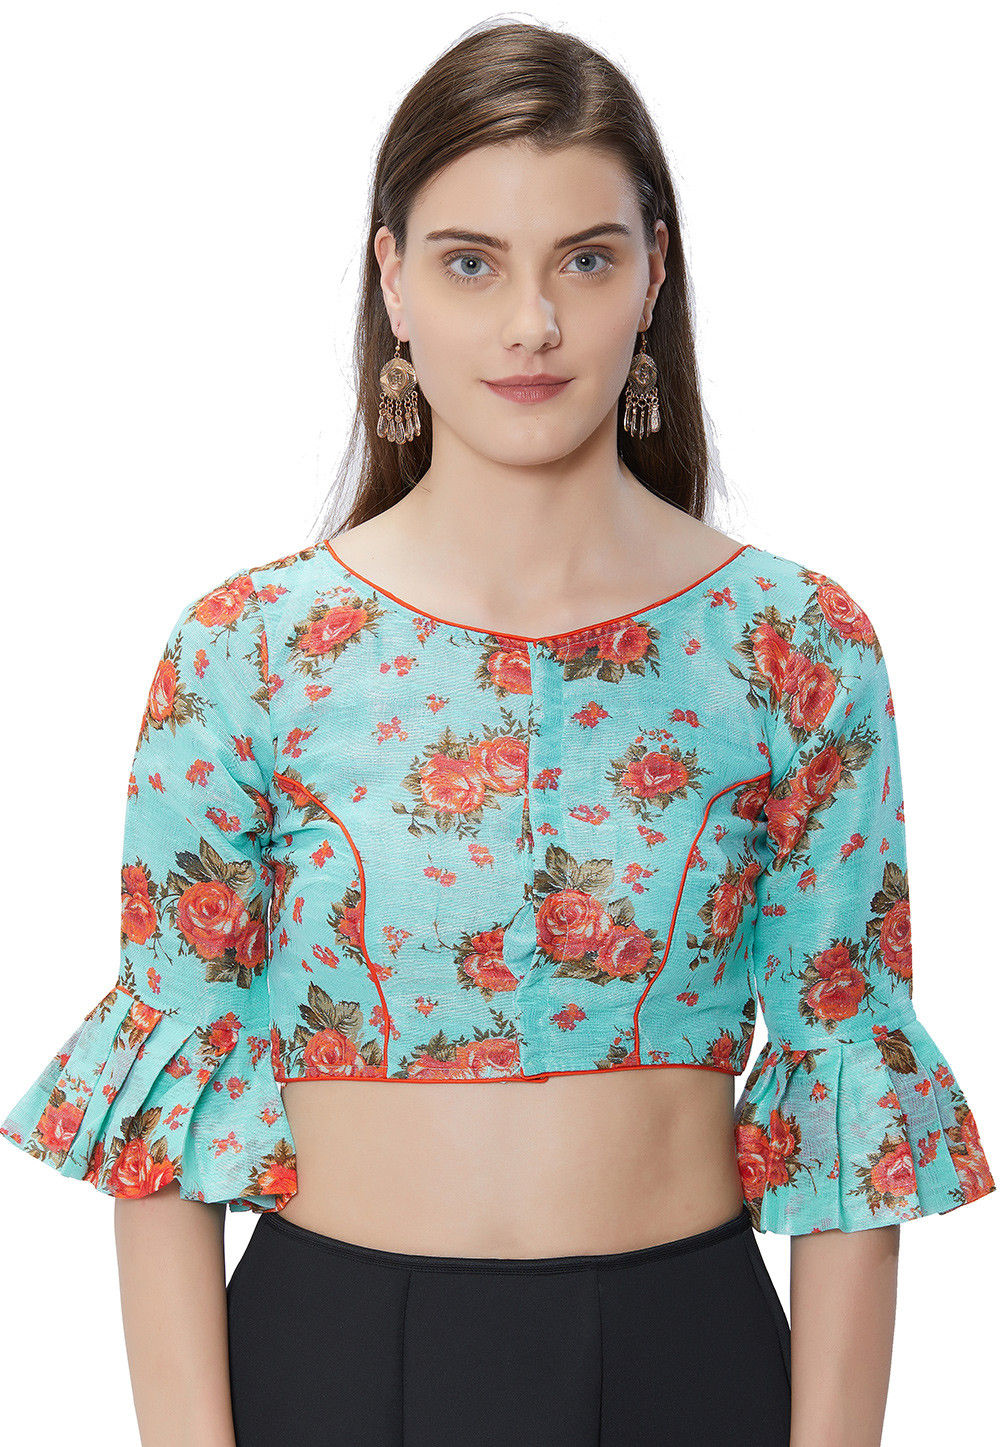 Printed Art Silk Blouse in Turquoise : UQX198